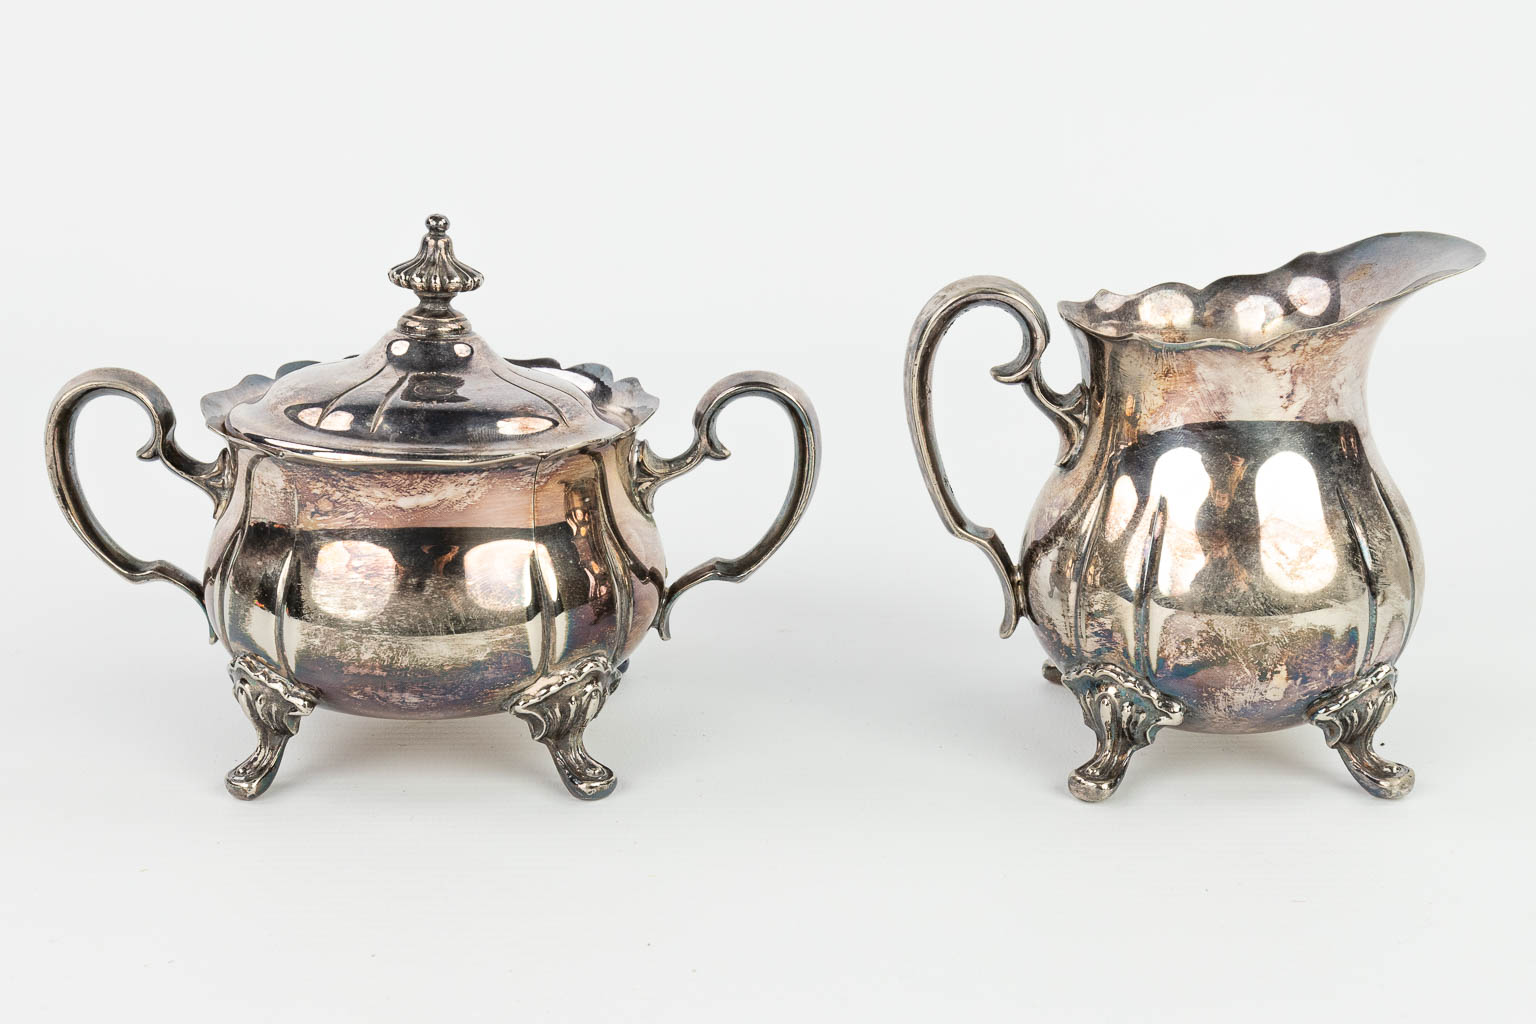 A coffee and tea service made of silver-plated metal. (H:25cm)